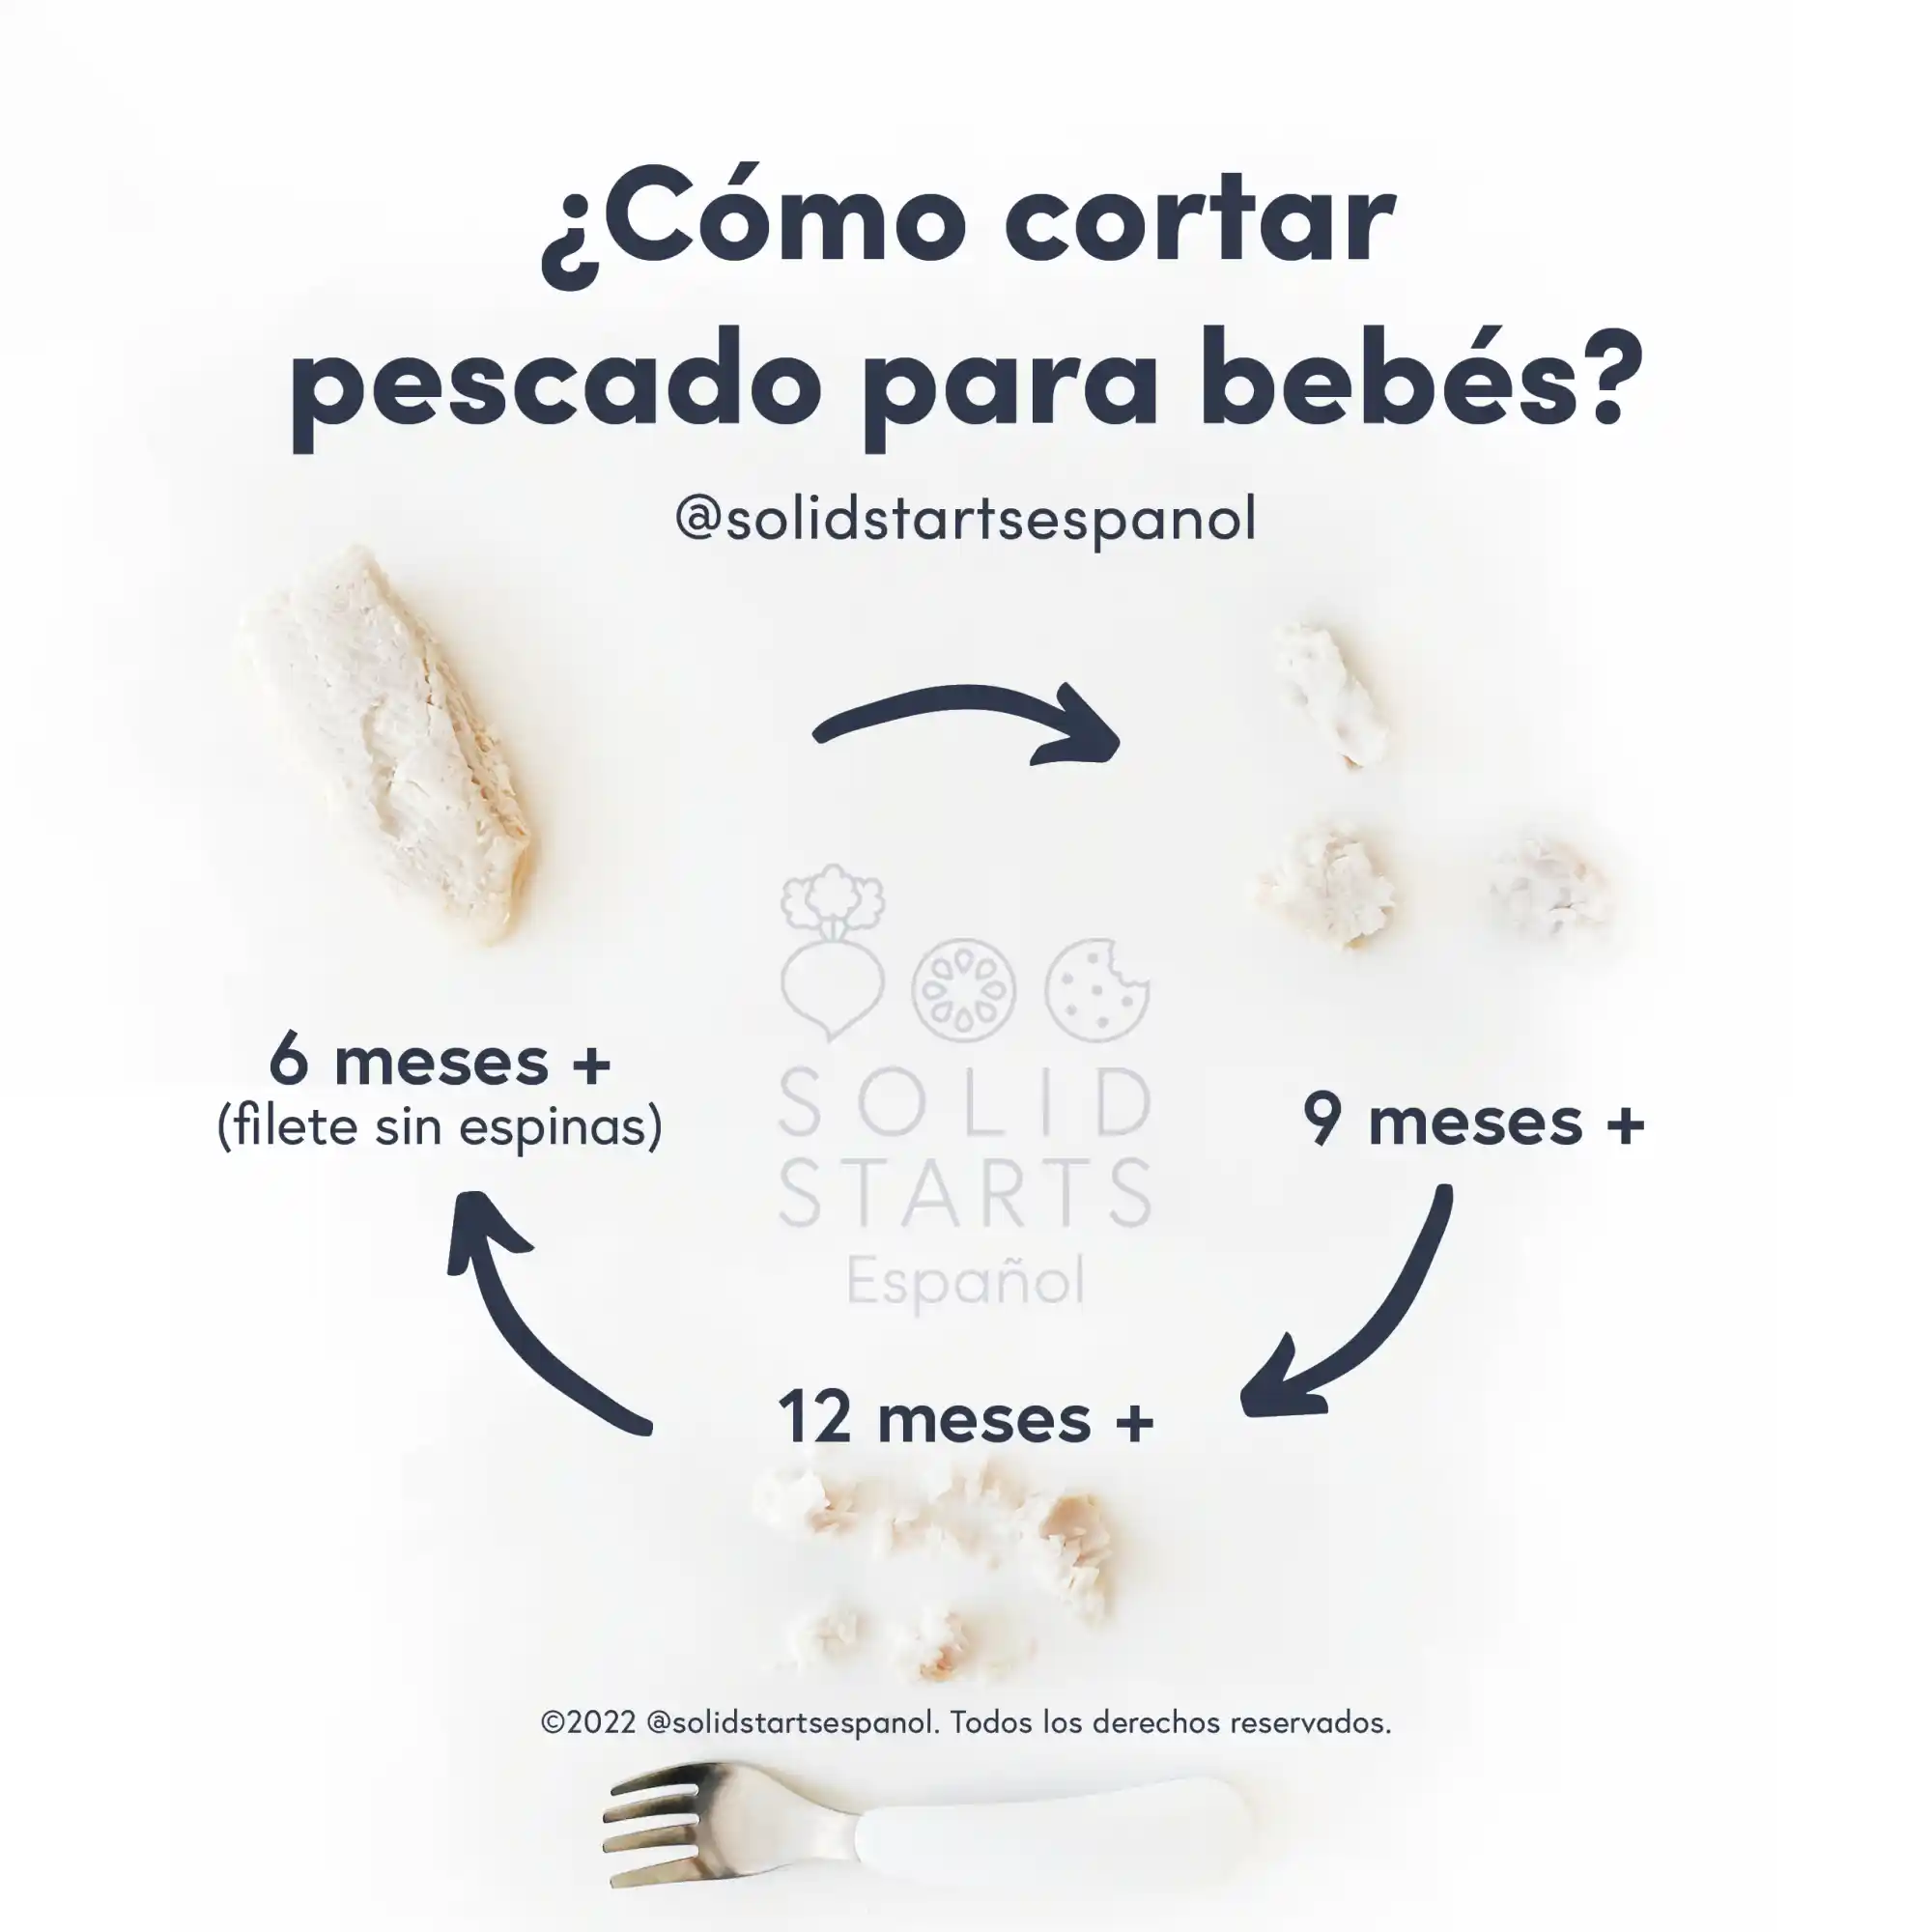 an infographic with the header "how to cut fish for babies": a thin deboned filet for babies 6 months+, bite-sized pieces for babies 9 months+, small flakes and pieces with a fork for toddlers 12 months+